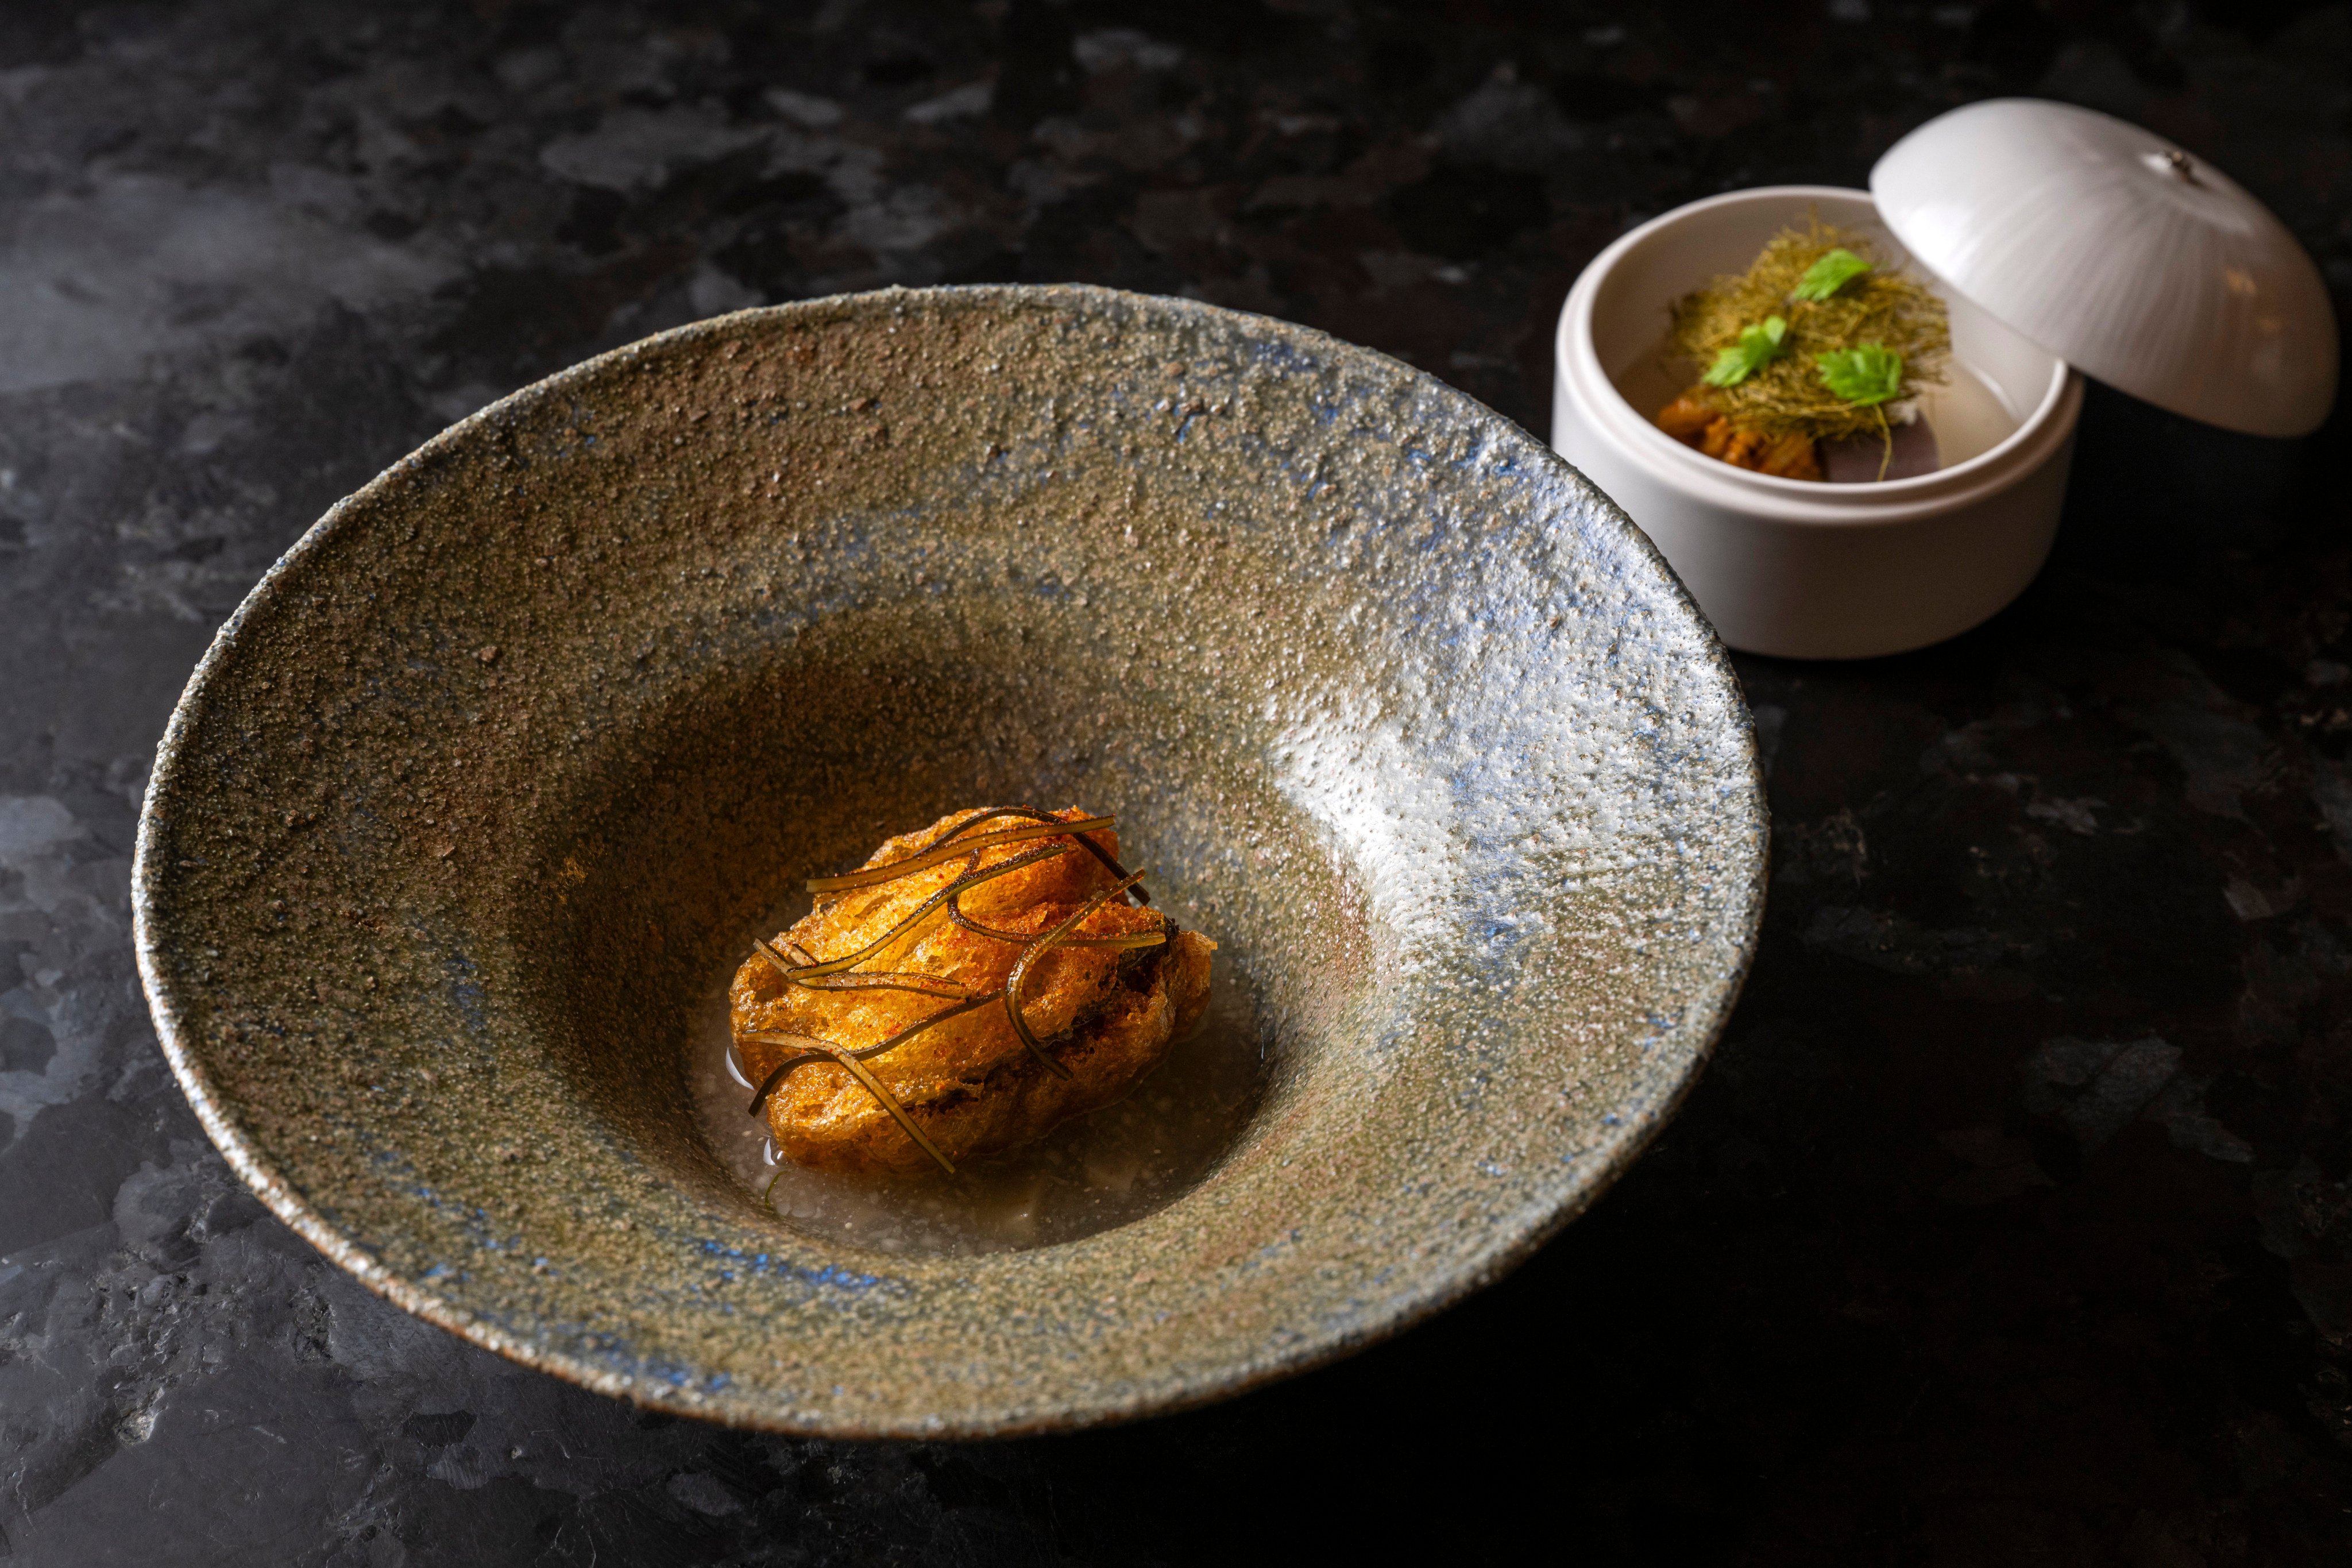 A dish at two-Michelin-star Atomix, a modern Korean restaurant in in New York. Social media has had an outsize impact on modern gastronomy. Chefs are divided on whether that is a good thing. Photo: Evan Sung